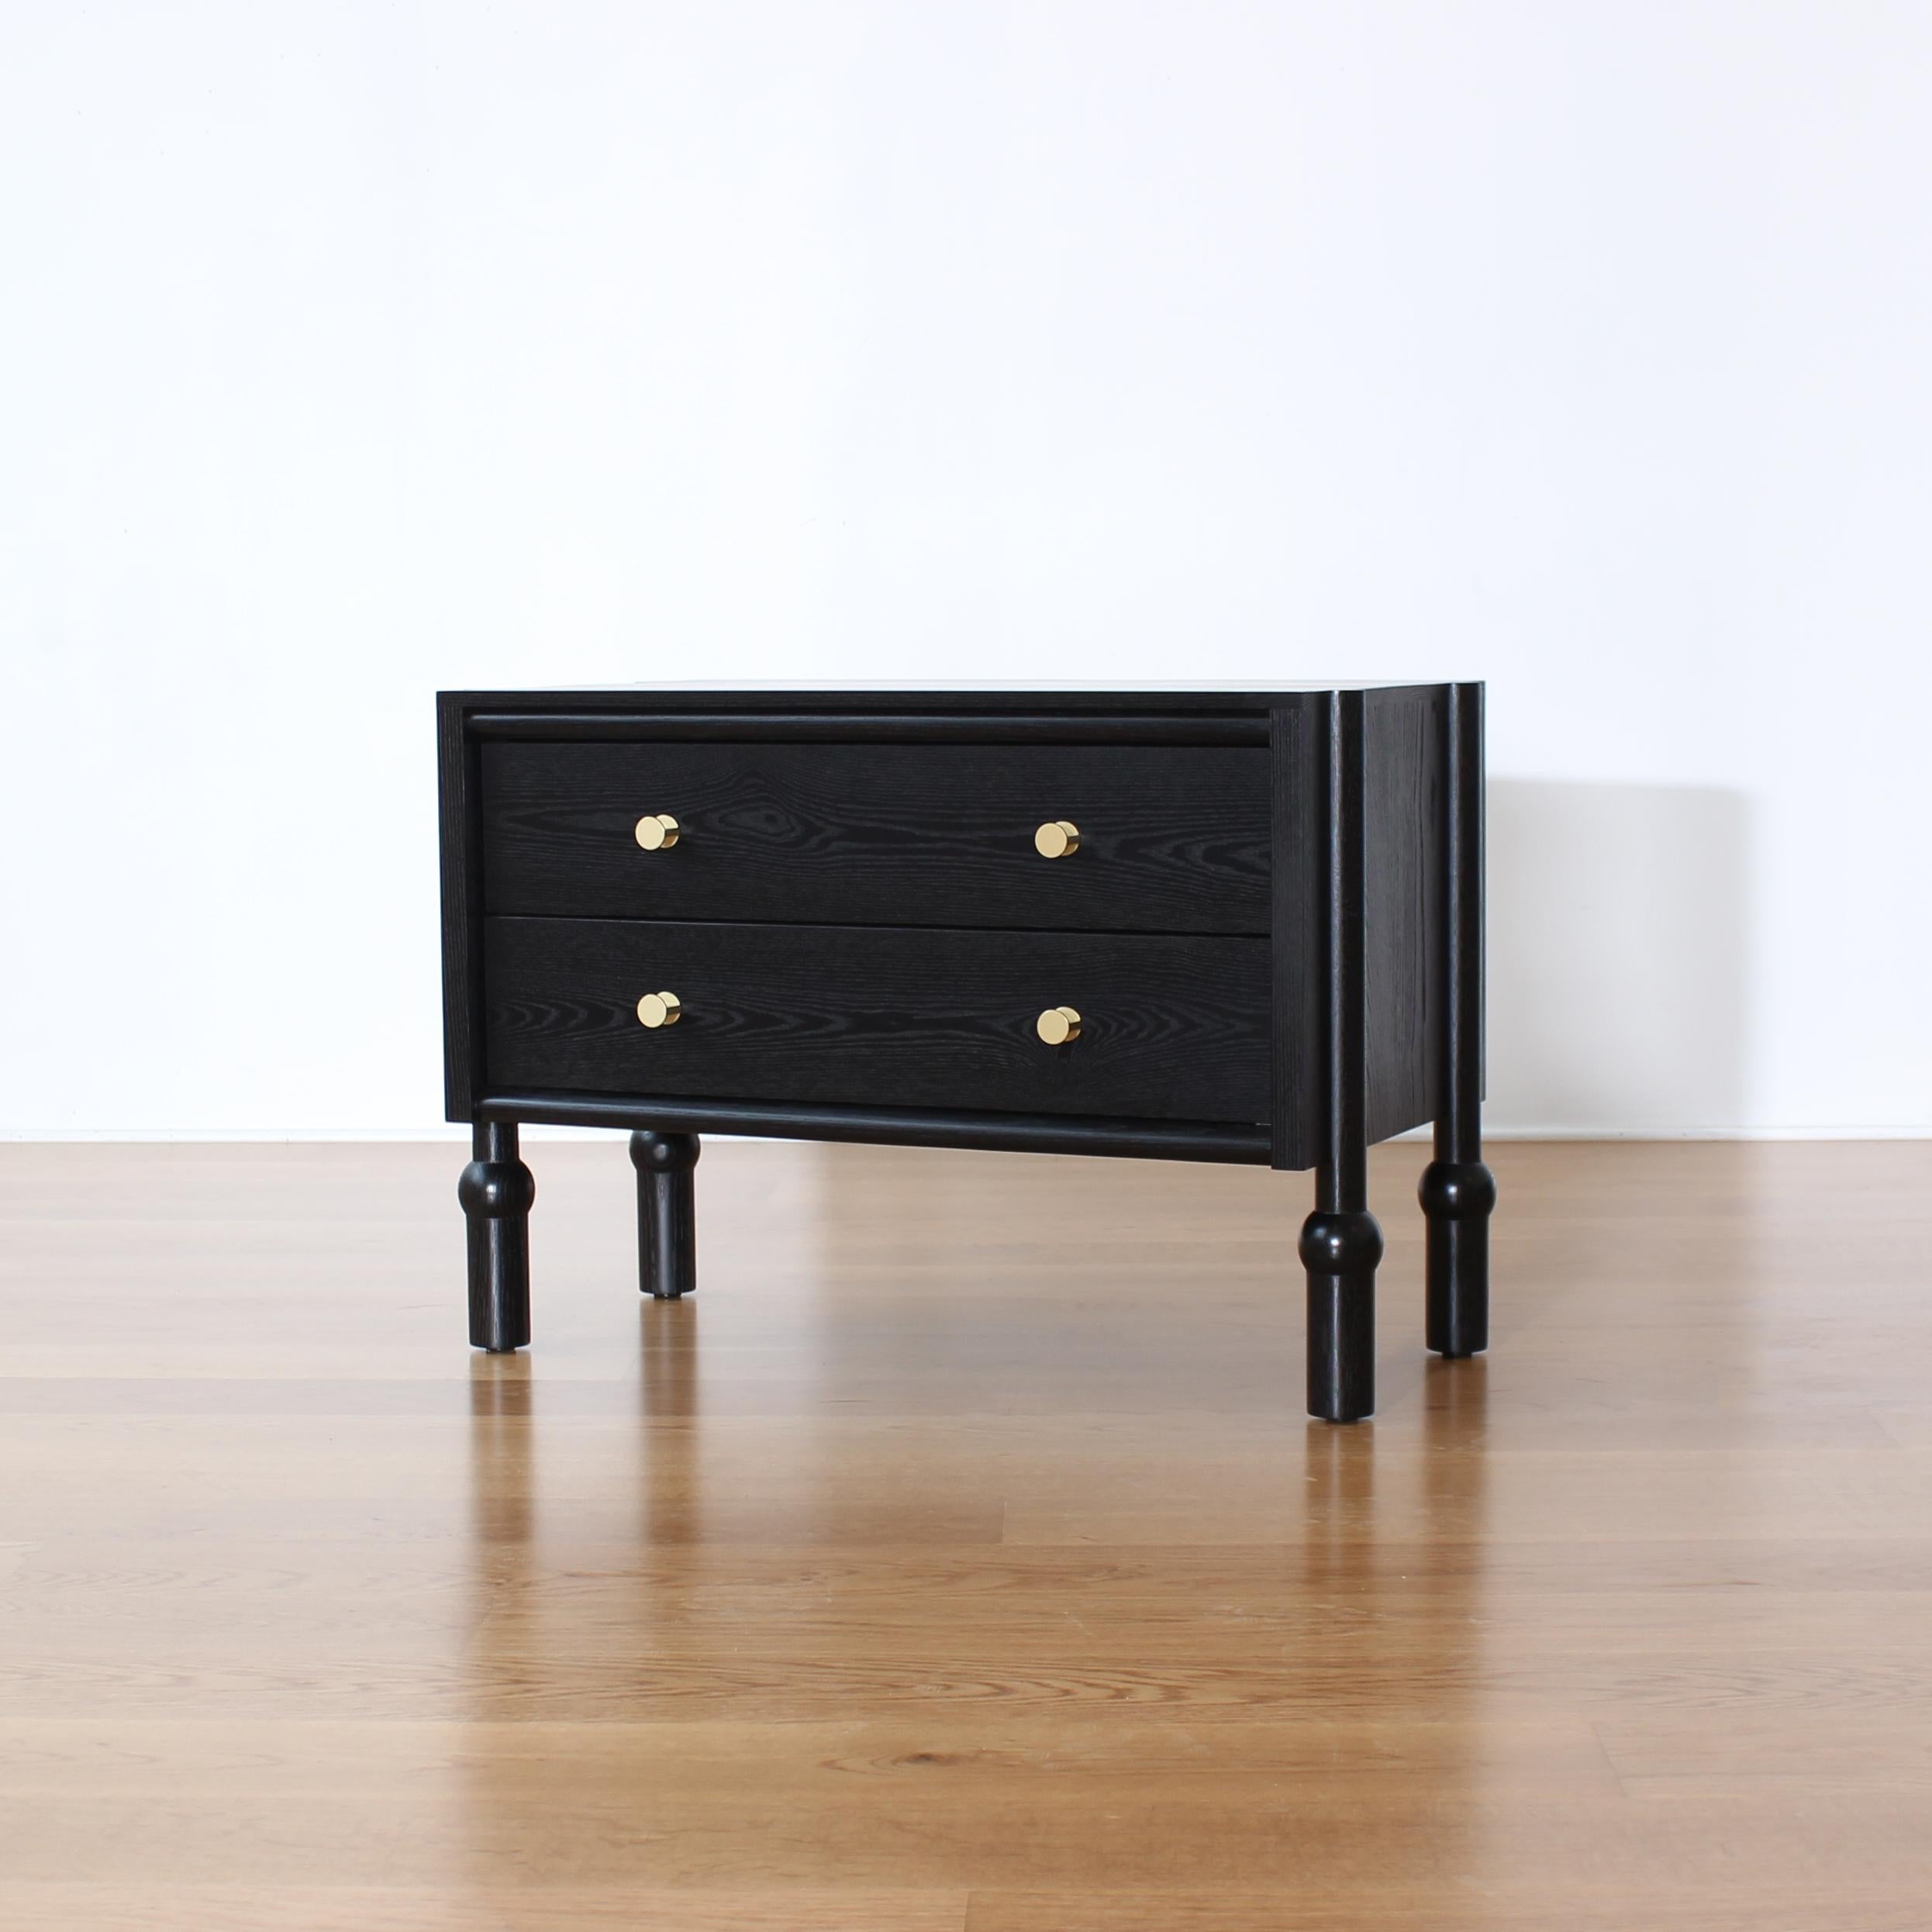 Mae Nightstand by Crump and Kwash 

Solid wood frame / hand turned legs / blackened finish / solid brass pulls / dovetailed solid wood drawer boxes / premium, full extension, soft close drawer slides

Customizations and other finishes available.